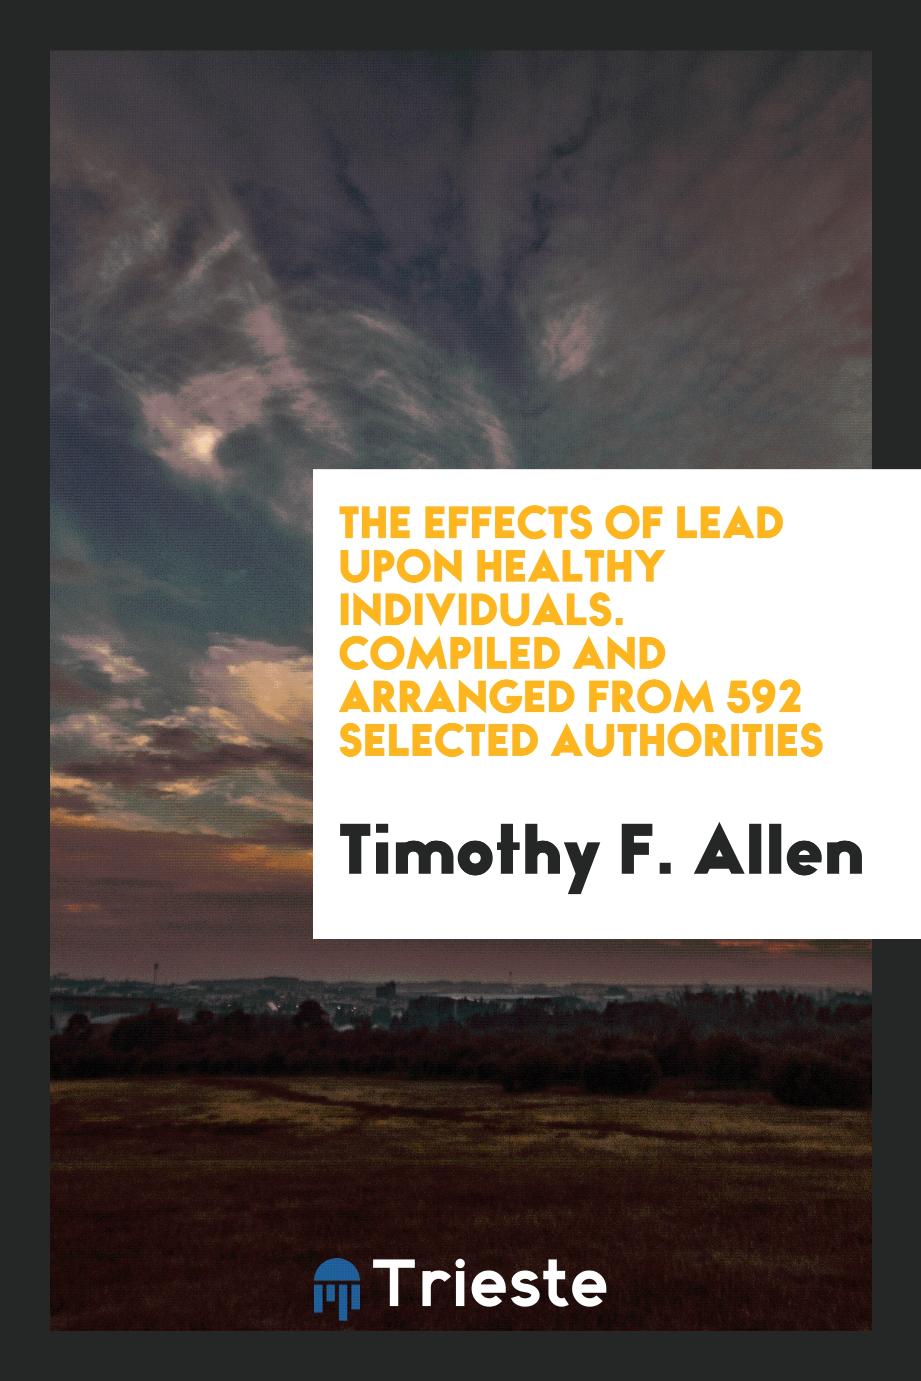 The Effects of Lead upon Healthy Individuals. Compiled and Arranged from 592 Selected Authorities